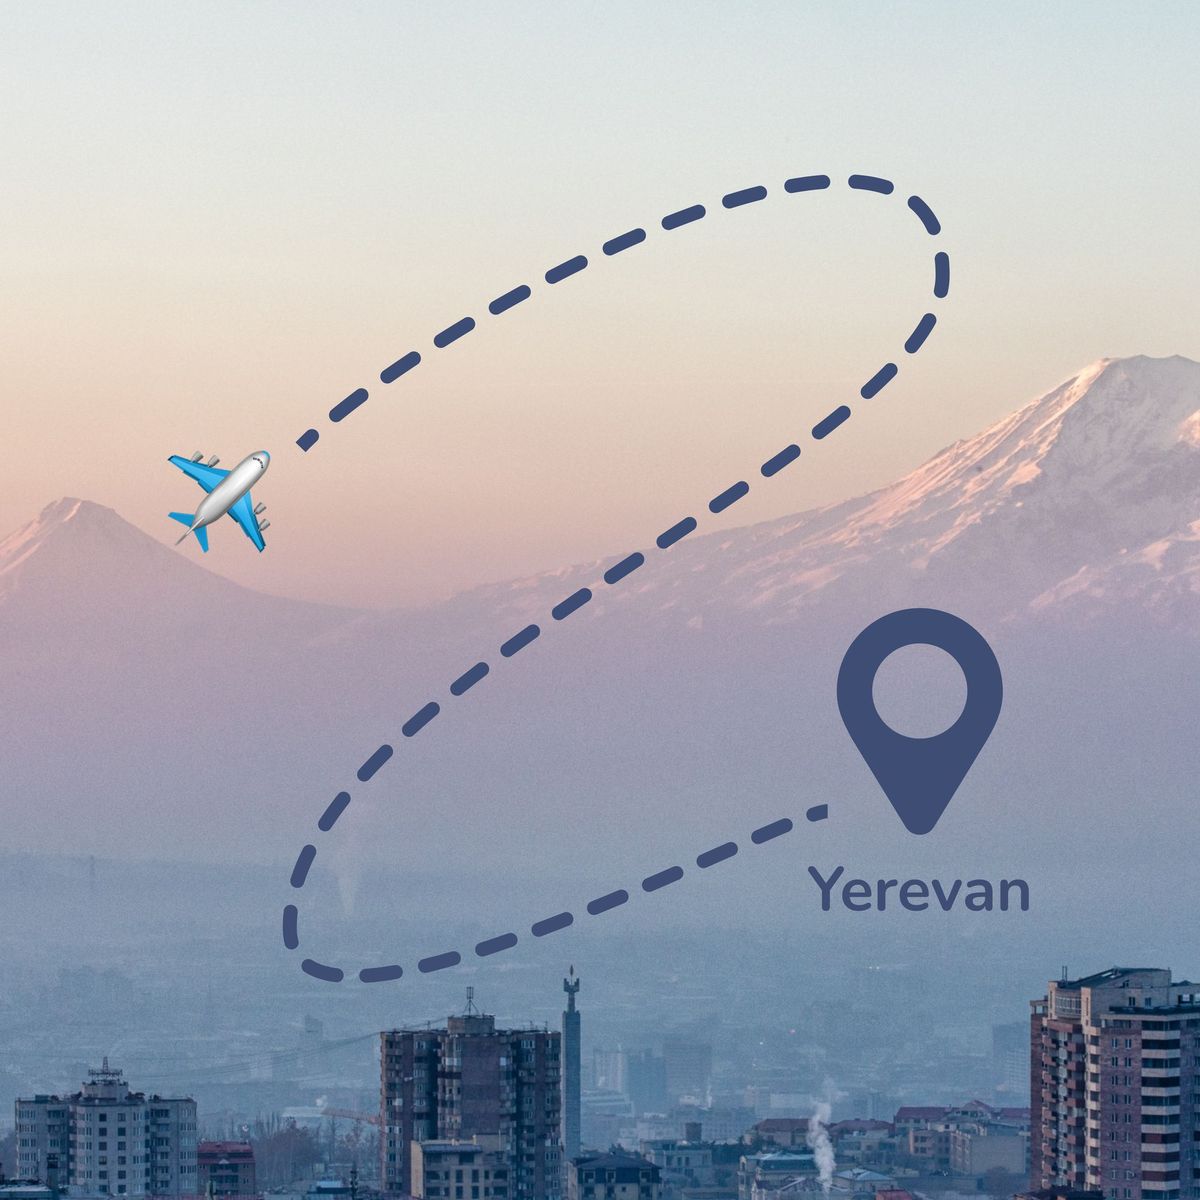 How we headed to Yerevan for a better life